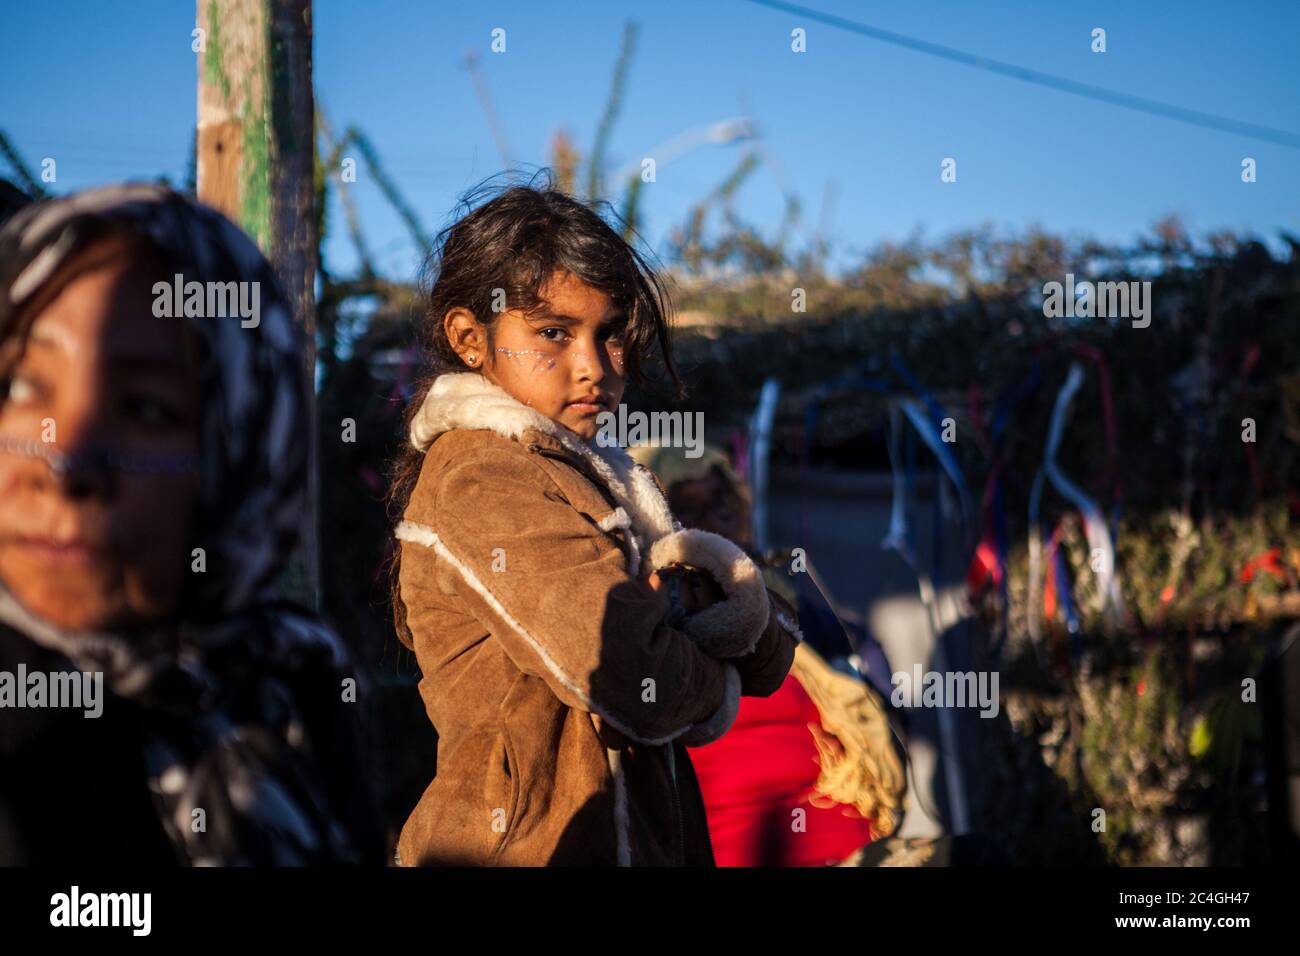 Punta Chueca, Mexico. 10th Dec, 2019. One of the young girls from the ComcÃac community takes part in the puberty celebration.The ComcÃac or Seri tribe, as they are known by many, are located in Punta Chueca, Sonora desert, by the northern pacific coast of Mexico. The ComcÃac indigenous community has a strong female presence within their culture. They are the principal organisers, promoters and those who are celebrated during the rituals and traditions of the community. This could not be clearer, than during one of the most important rituals of the community, the ceremony of puberty. This Stock Photo